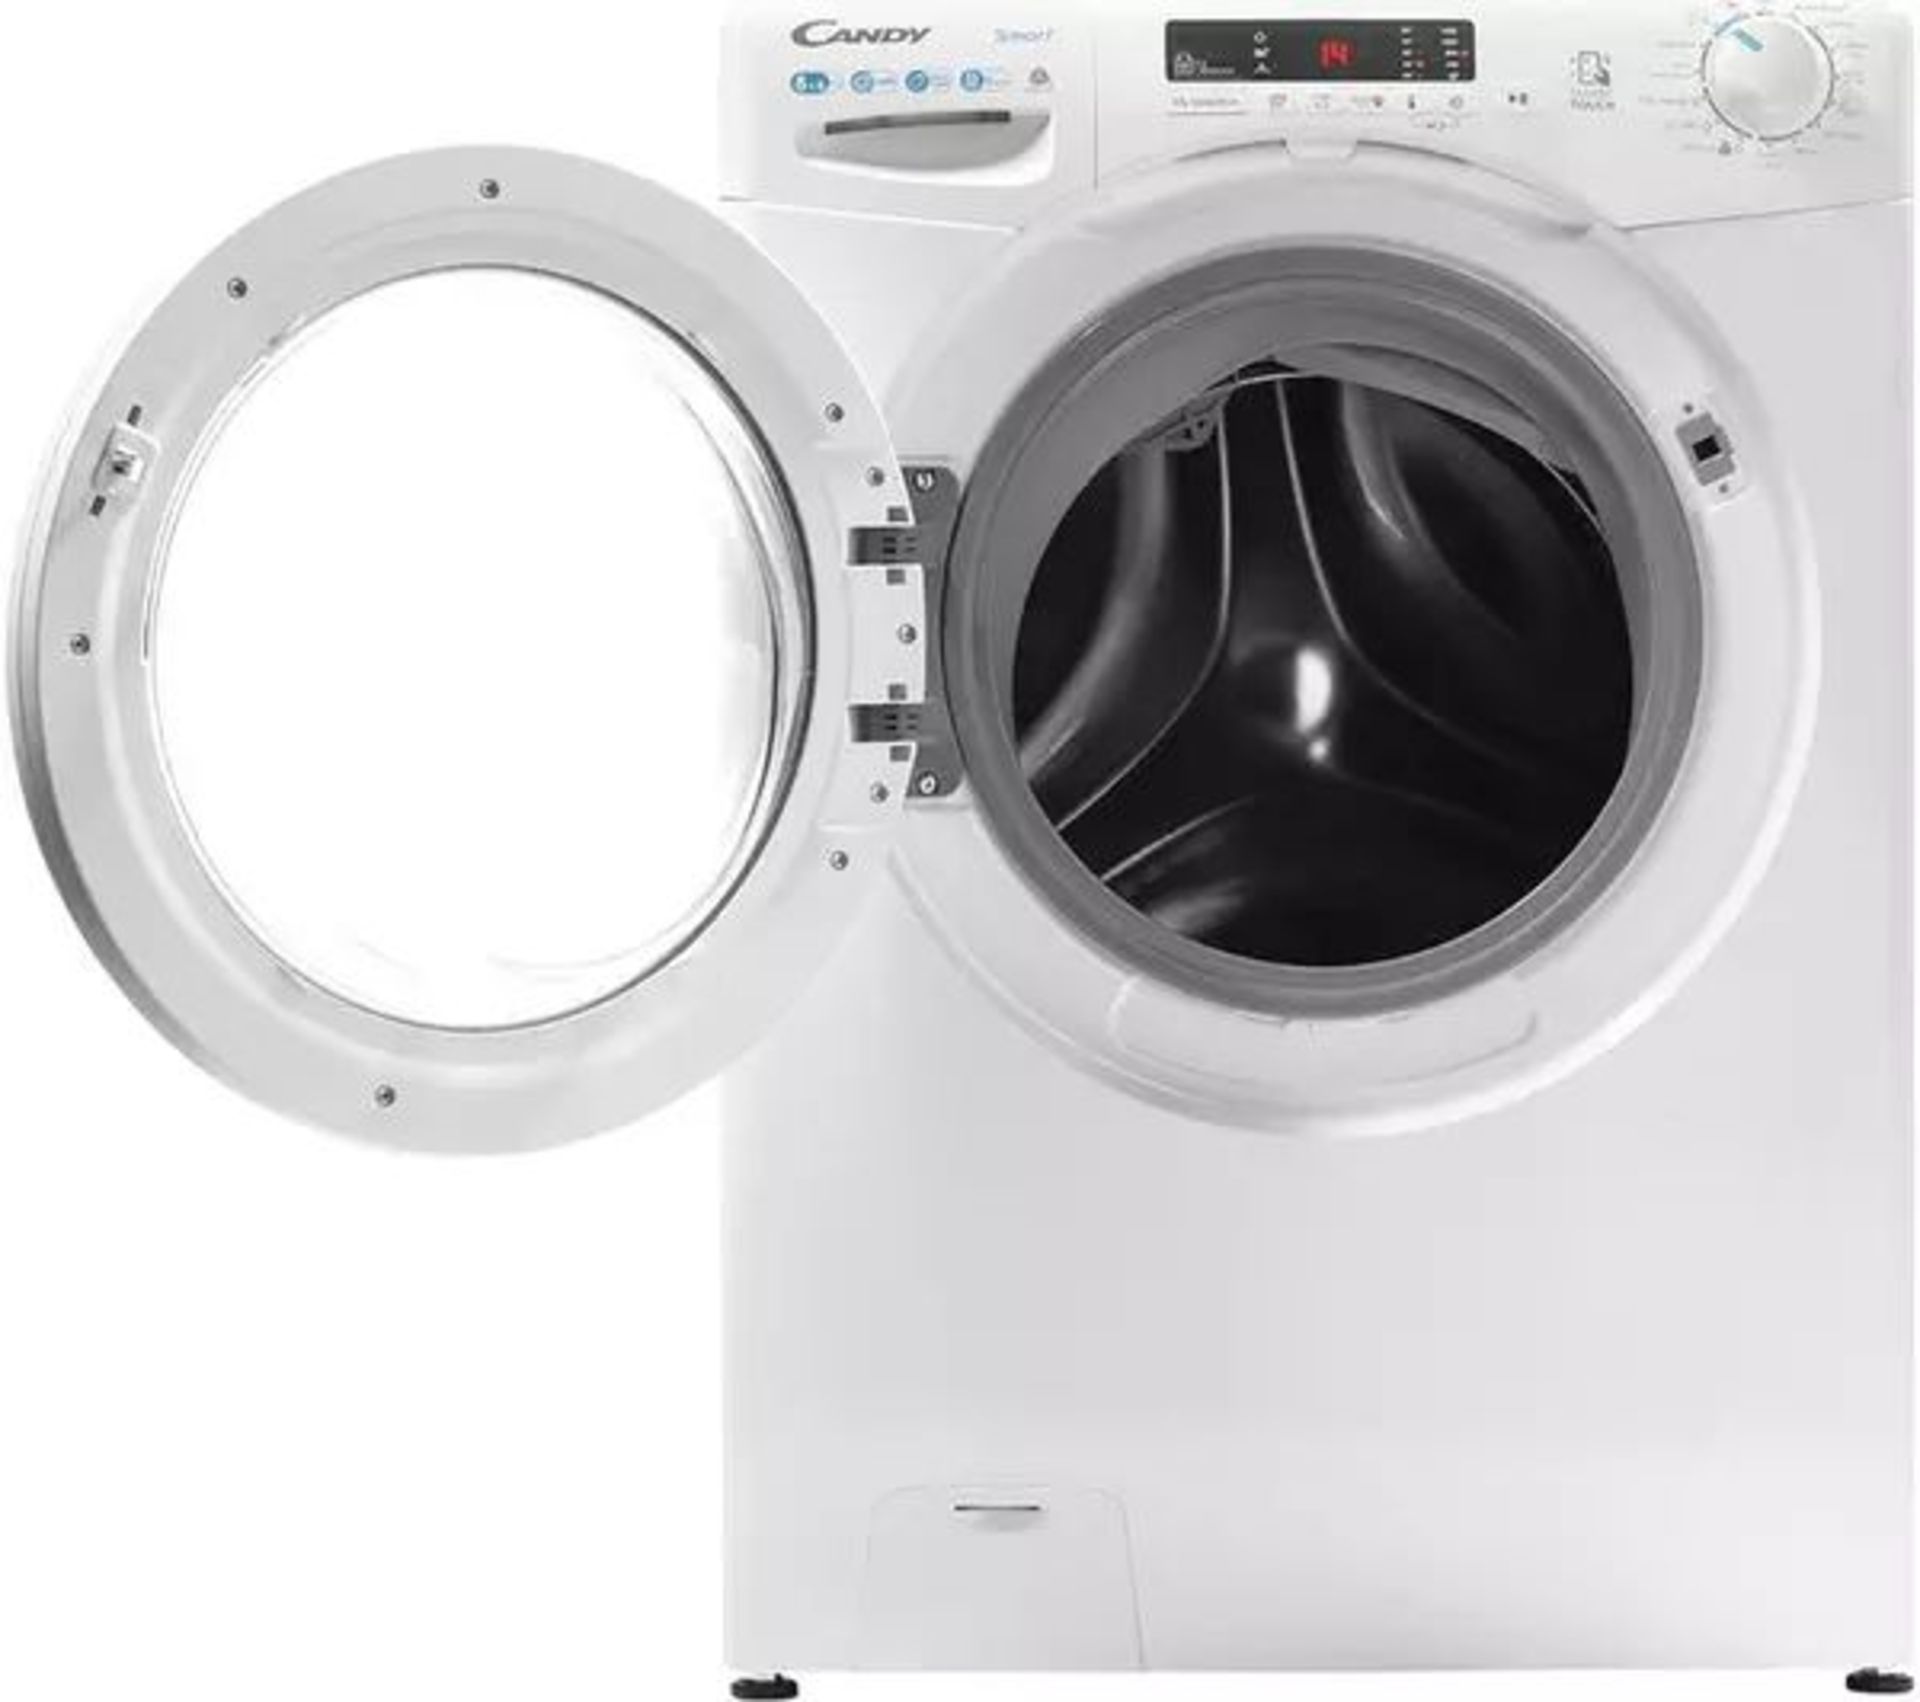 CANDY CSW 4852DE NFC 8 kg Washer Dryer – White. - S2. RRP £529.00. With the Candy CSW 4852DE NFC 8 - Bild 2 aus 2